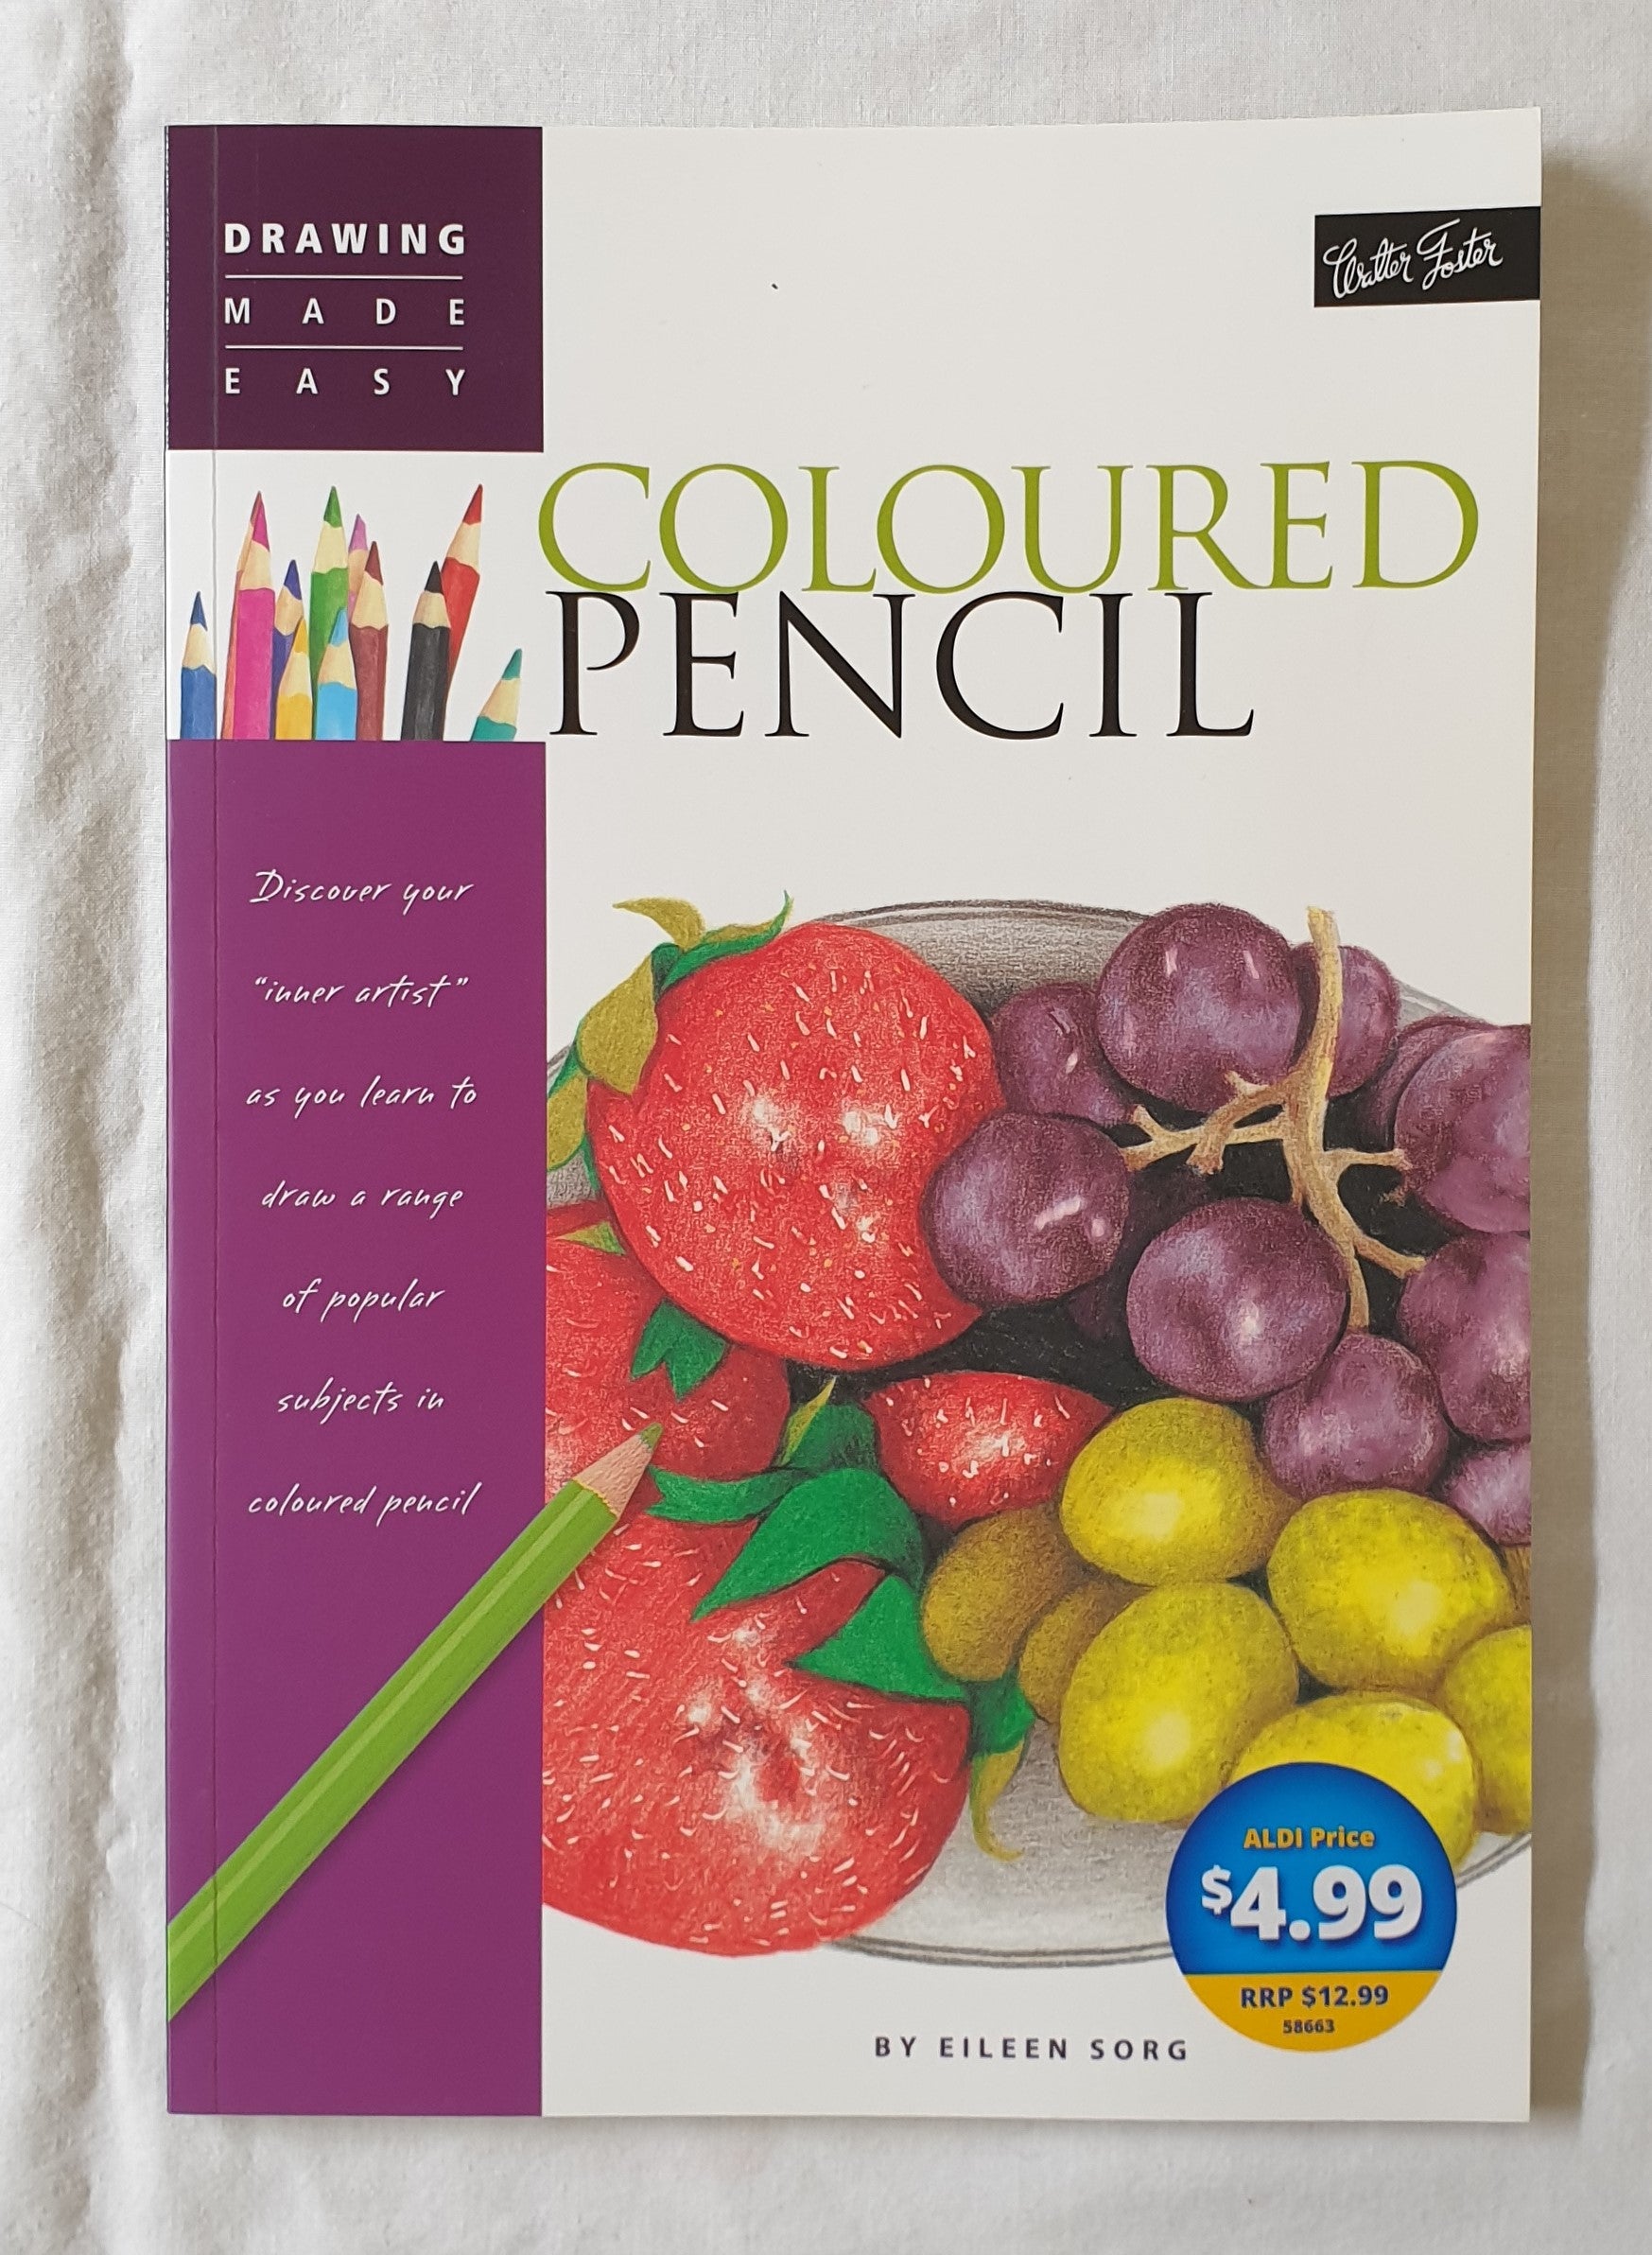 Coloured Pencil by Eileen Sorg